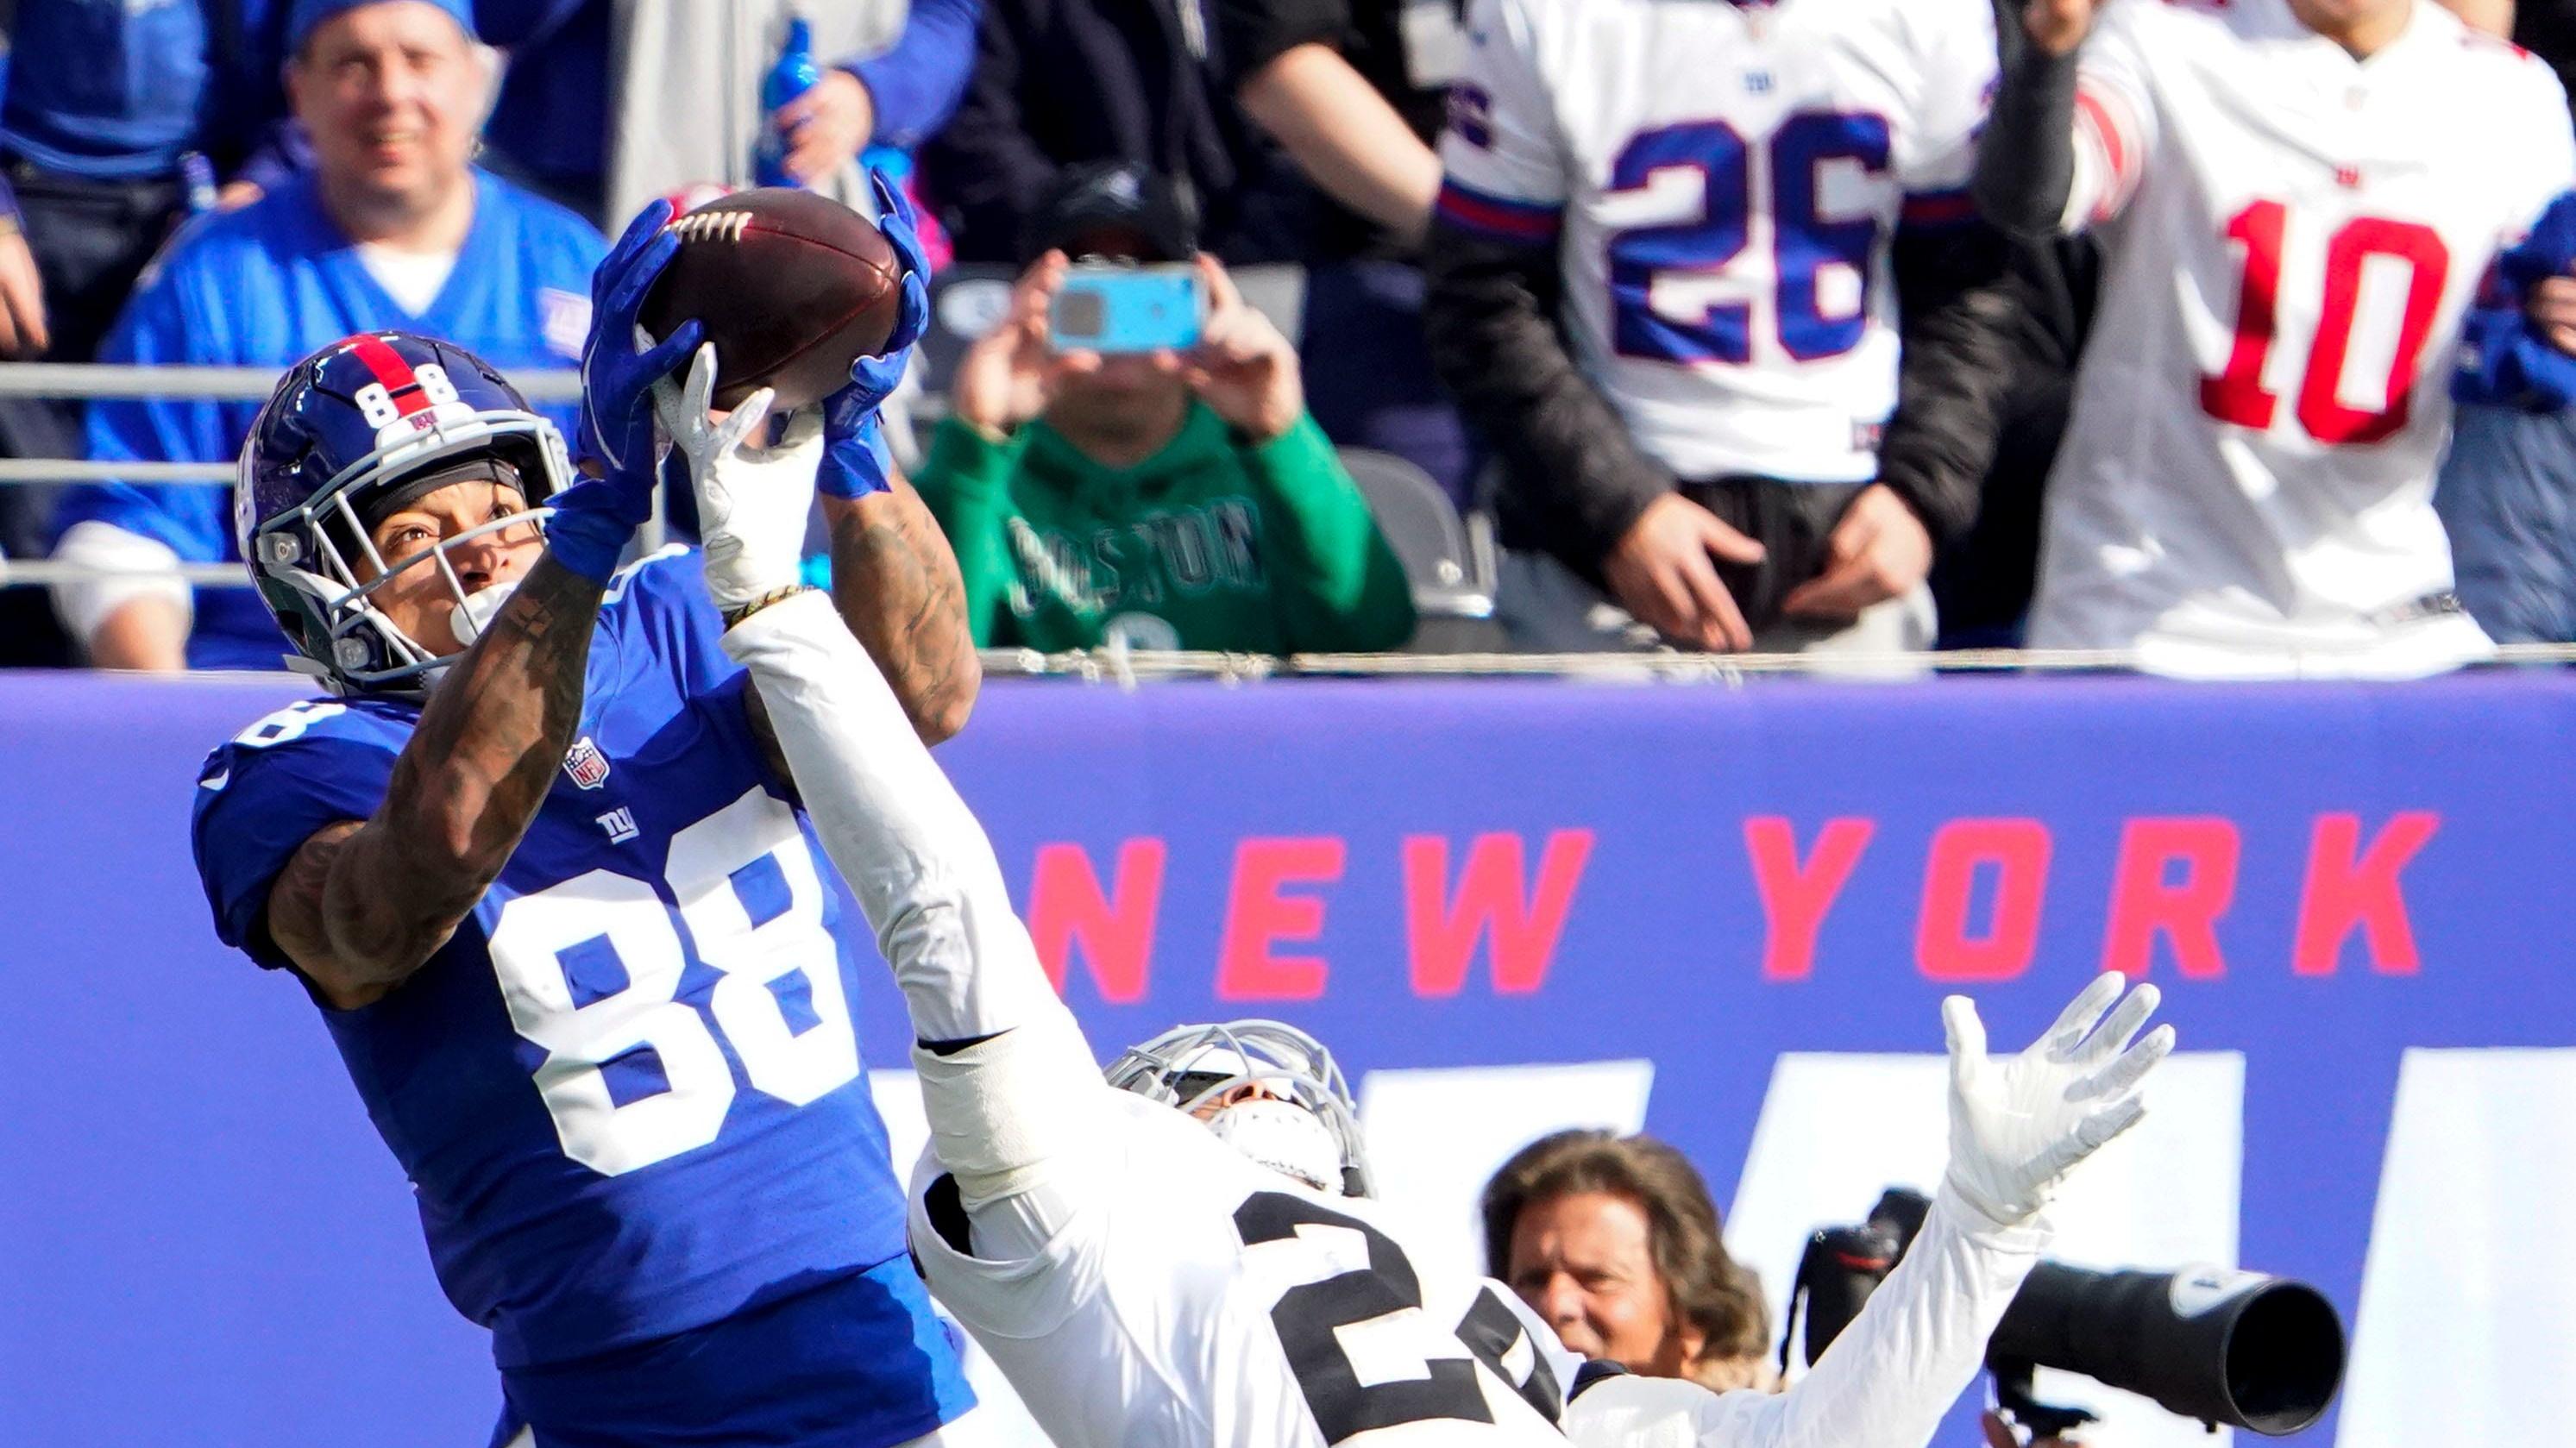 New York Giants tight end Evan Engram (88) makes a touchdown catch over Las Vegas Raiders defensive back Johnathan Abram (24) in the first half at MetLife Stadium on Sunday, Nov. 7, 2021, in East Rutherford. Nyg Vs Lvr / © Danielle Parhizkaran/NorthJersey.com / USA TODAY NETWORK